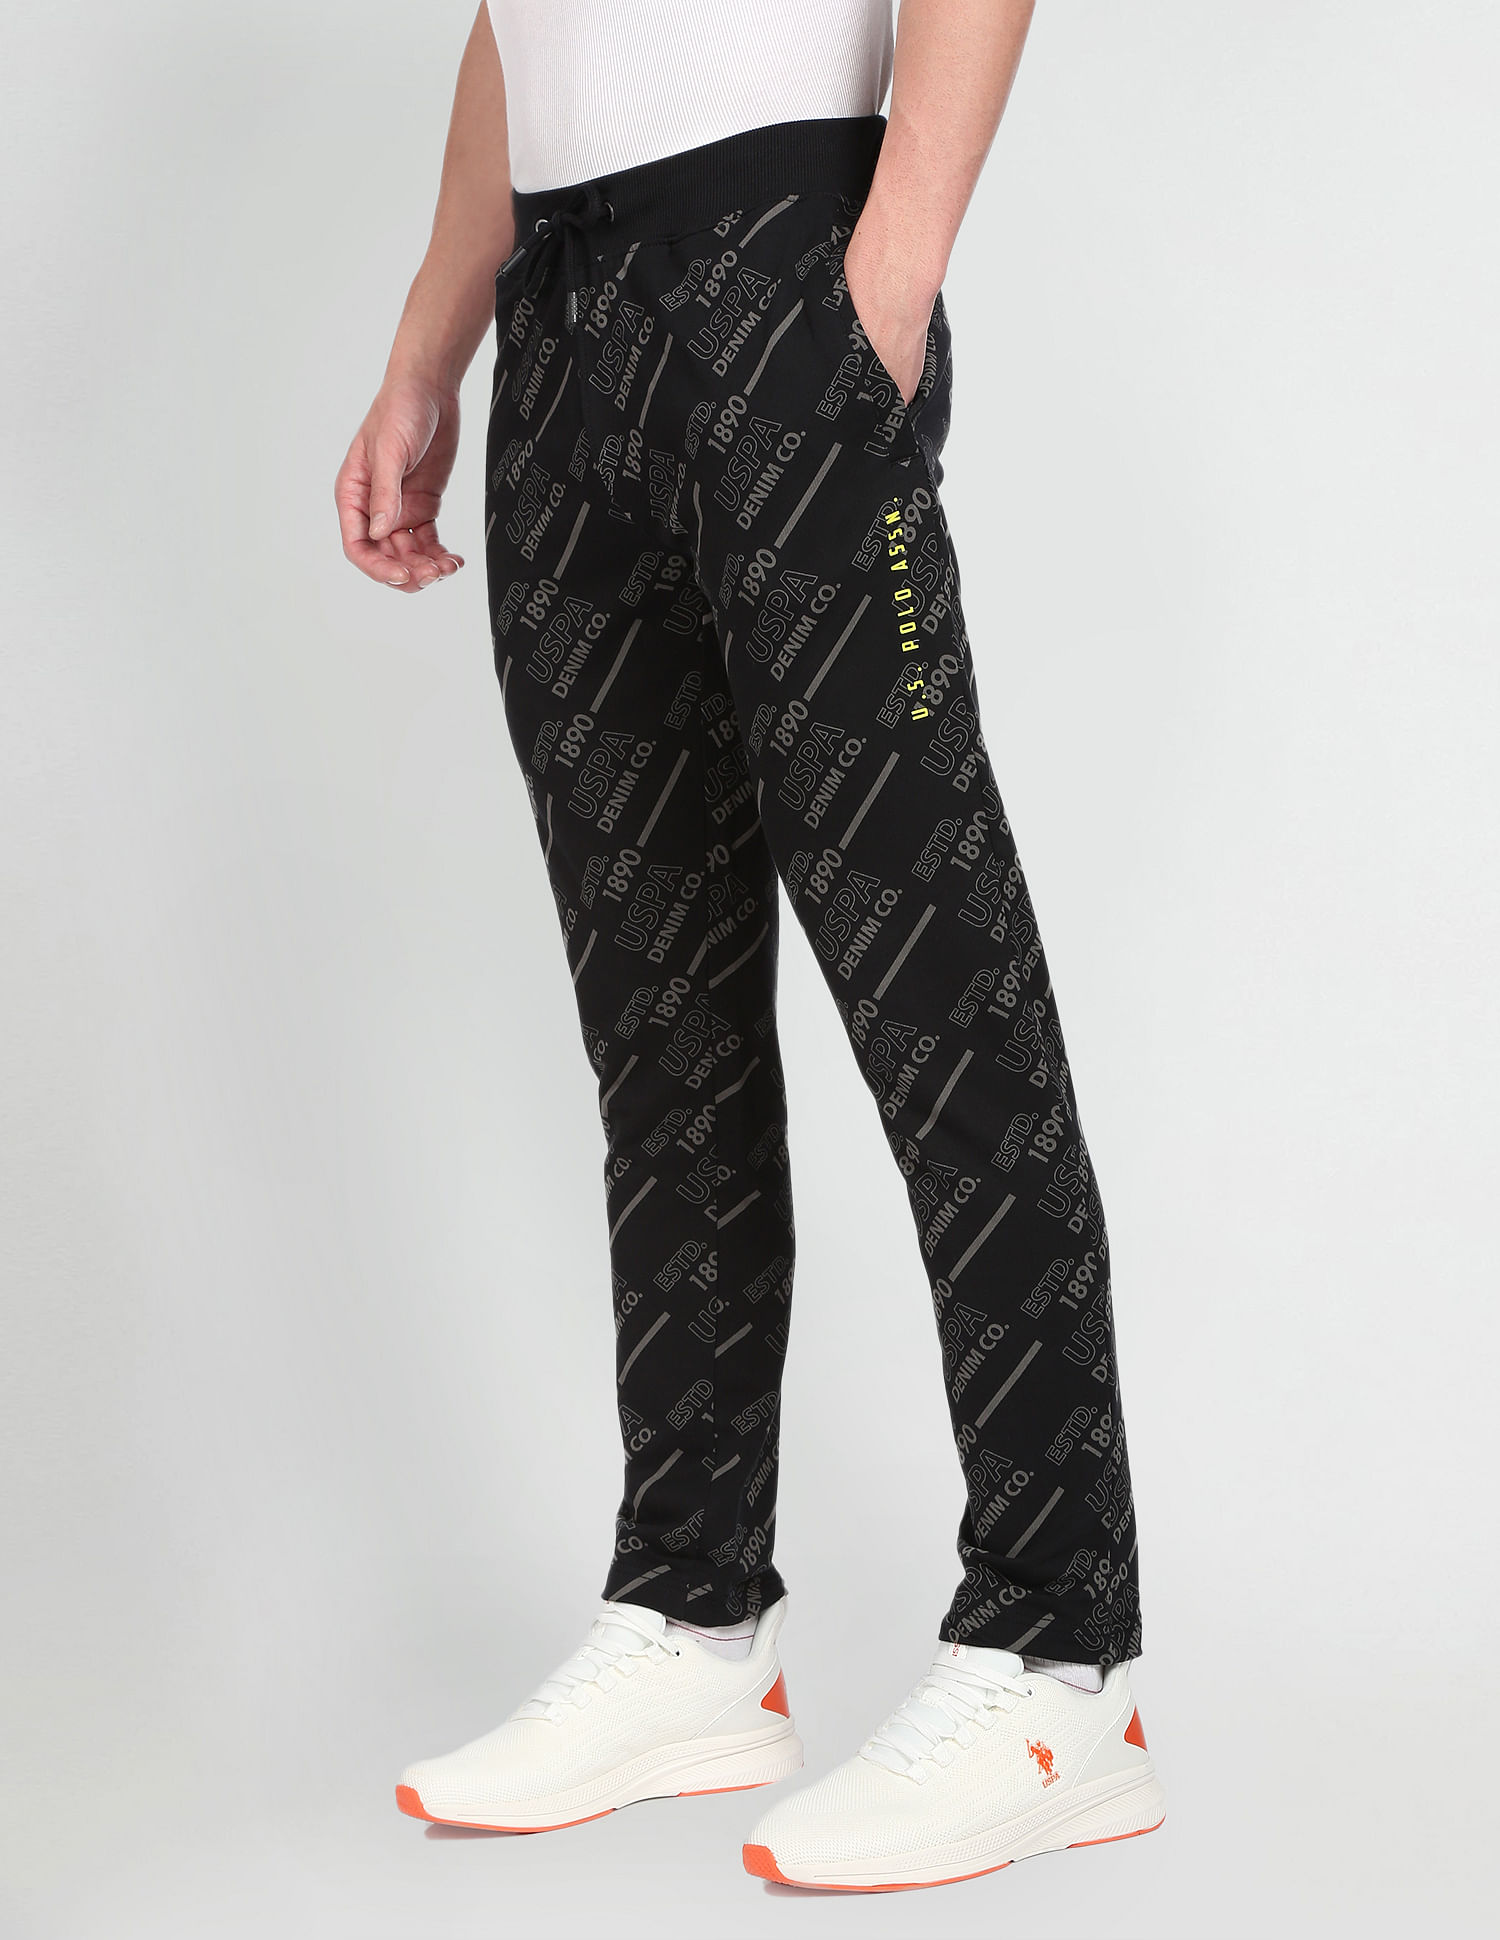 ALL STAR TRACK PANT – House of Sunny